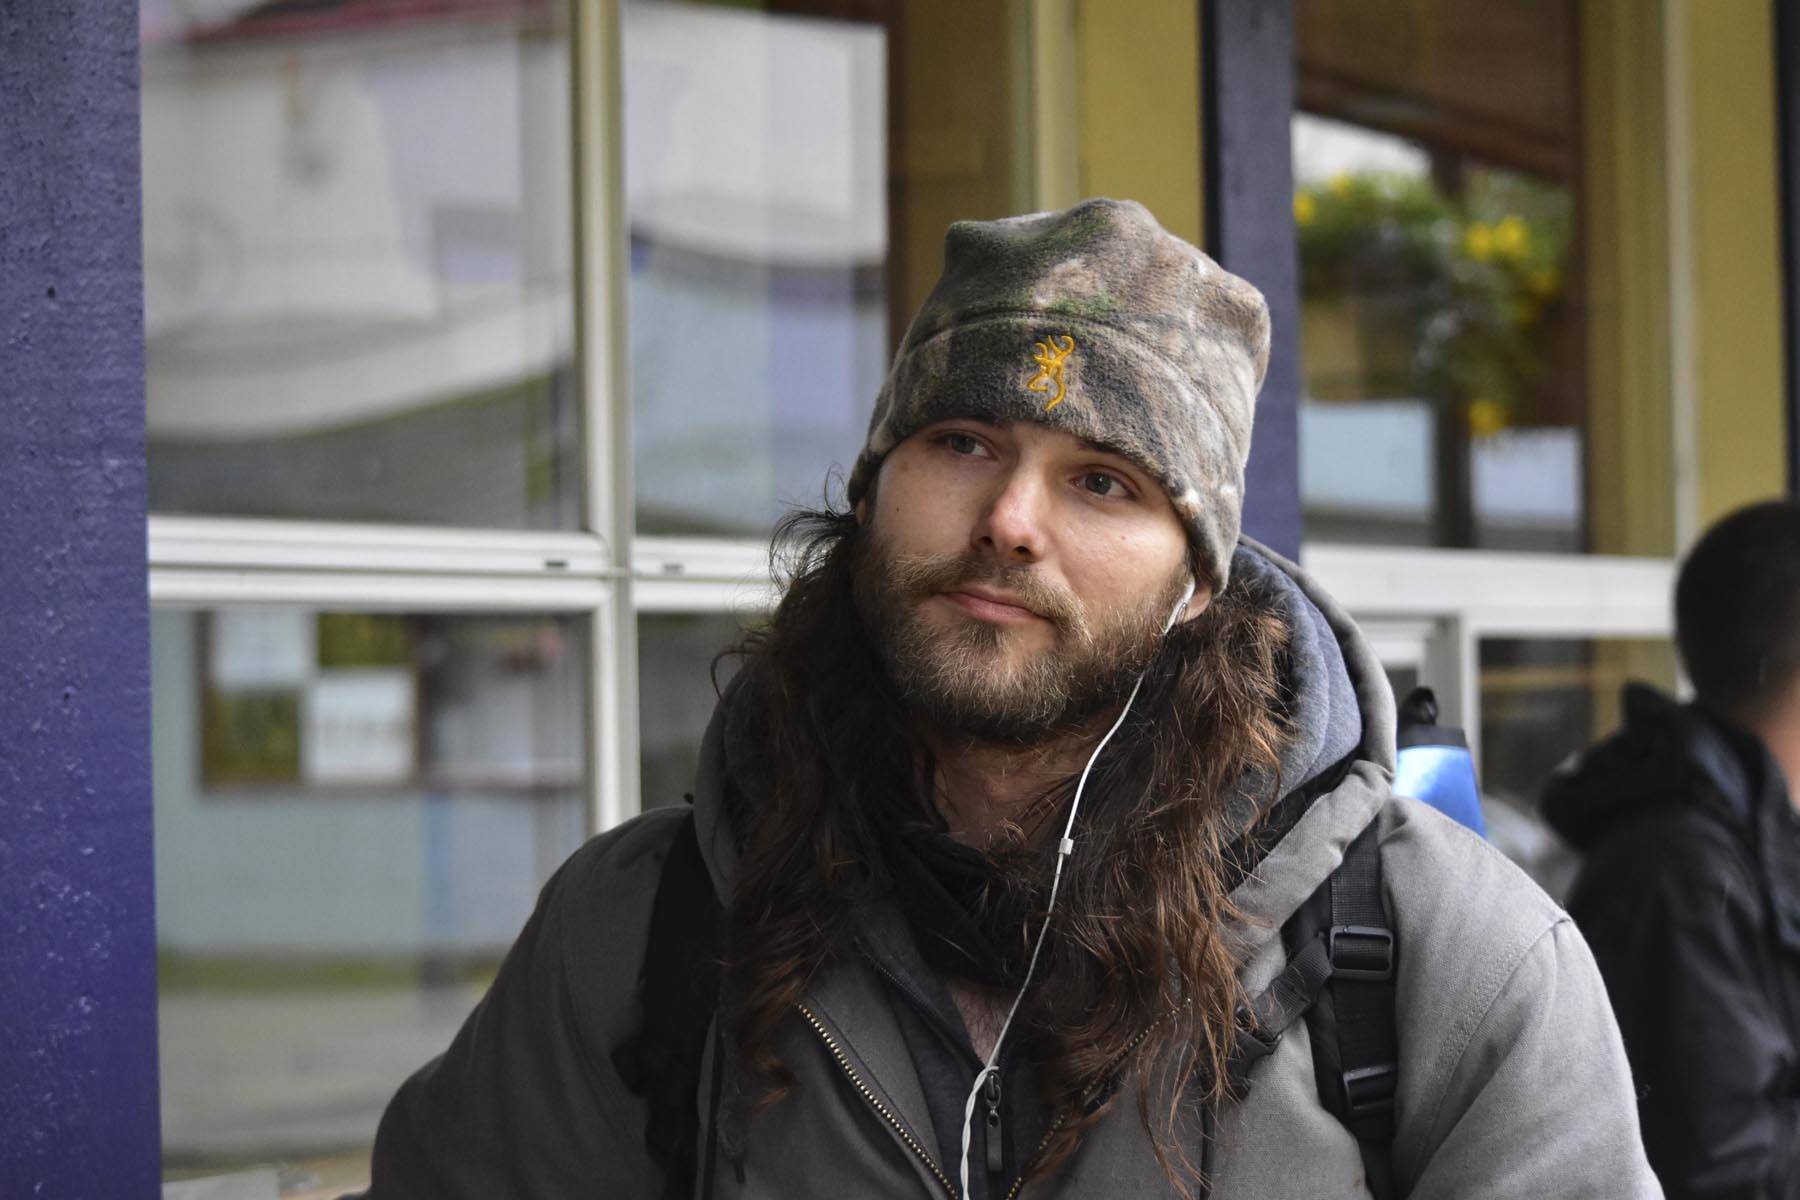 Steve Kissack pauses while eating dinner outside the Glory Hall, June 25, 2020. Executive Director Mariya Lovishchuk said that the Glory Hall as the sole source of food for many is leading to friction with downtown residents and businesses, and supports the Juneau Cares program, a program that pays local restaurants to help feed the homeless or food-insecure. (Juneau Empire | Peter Segall)